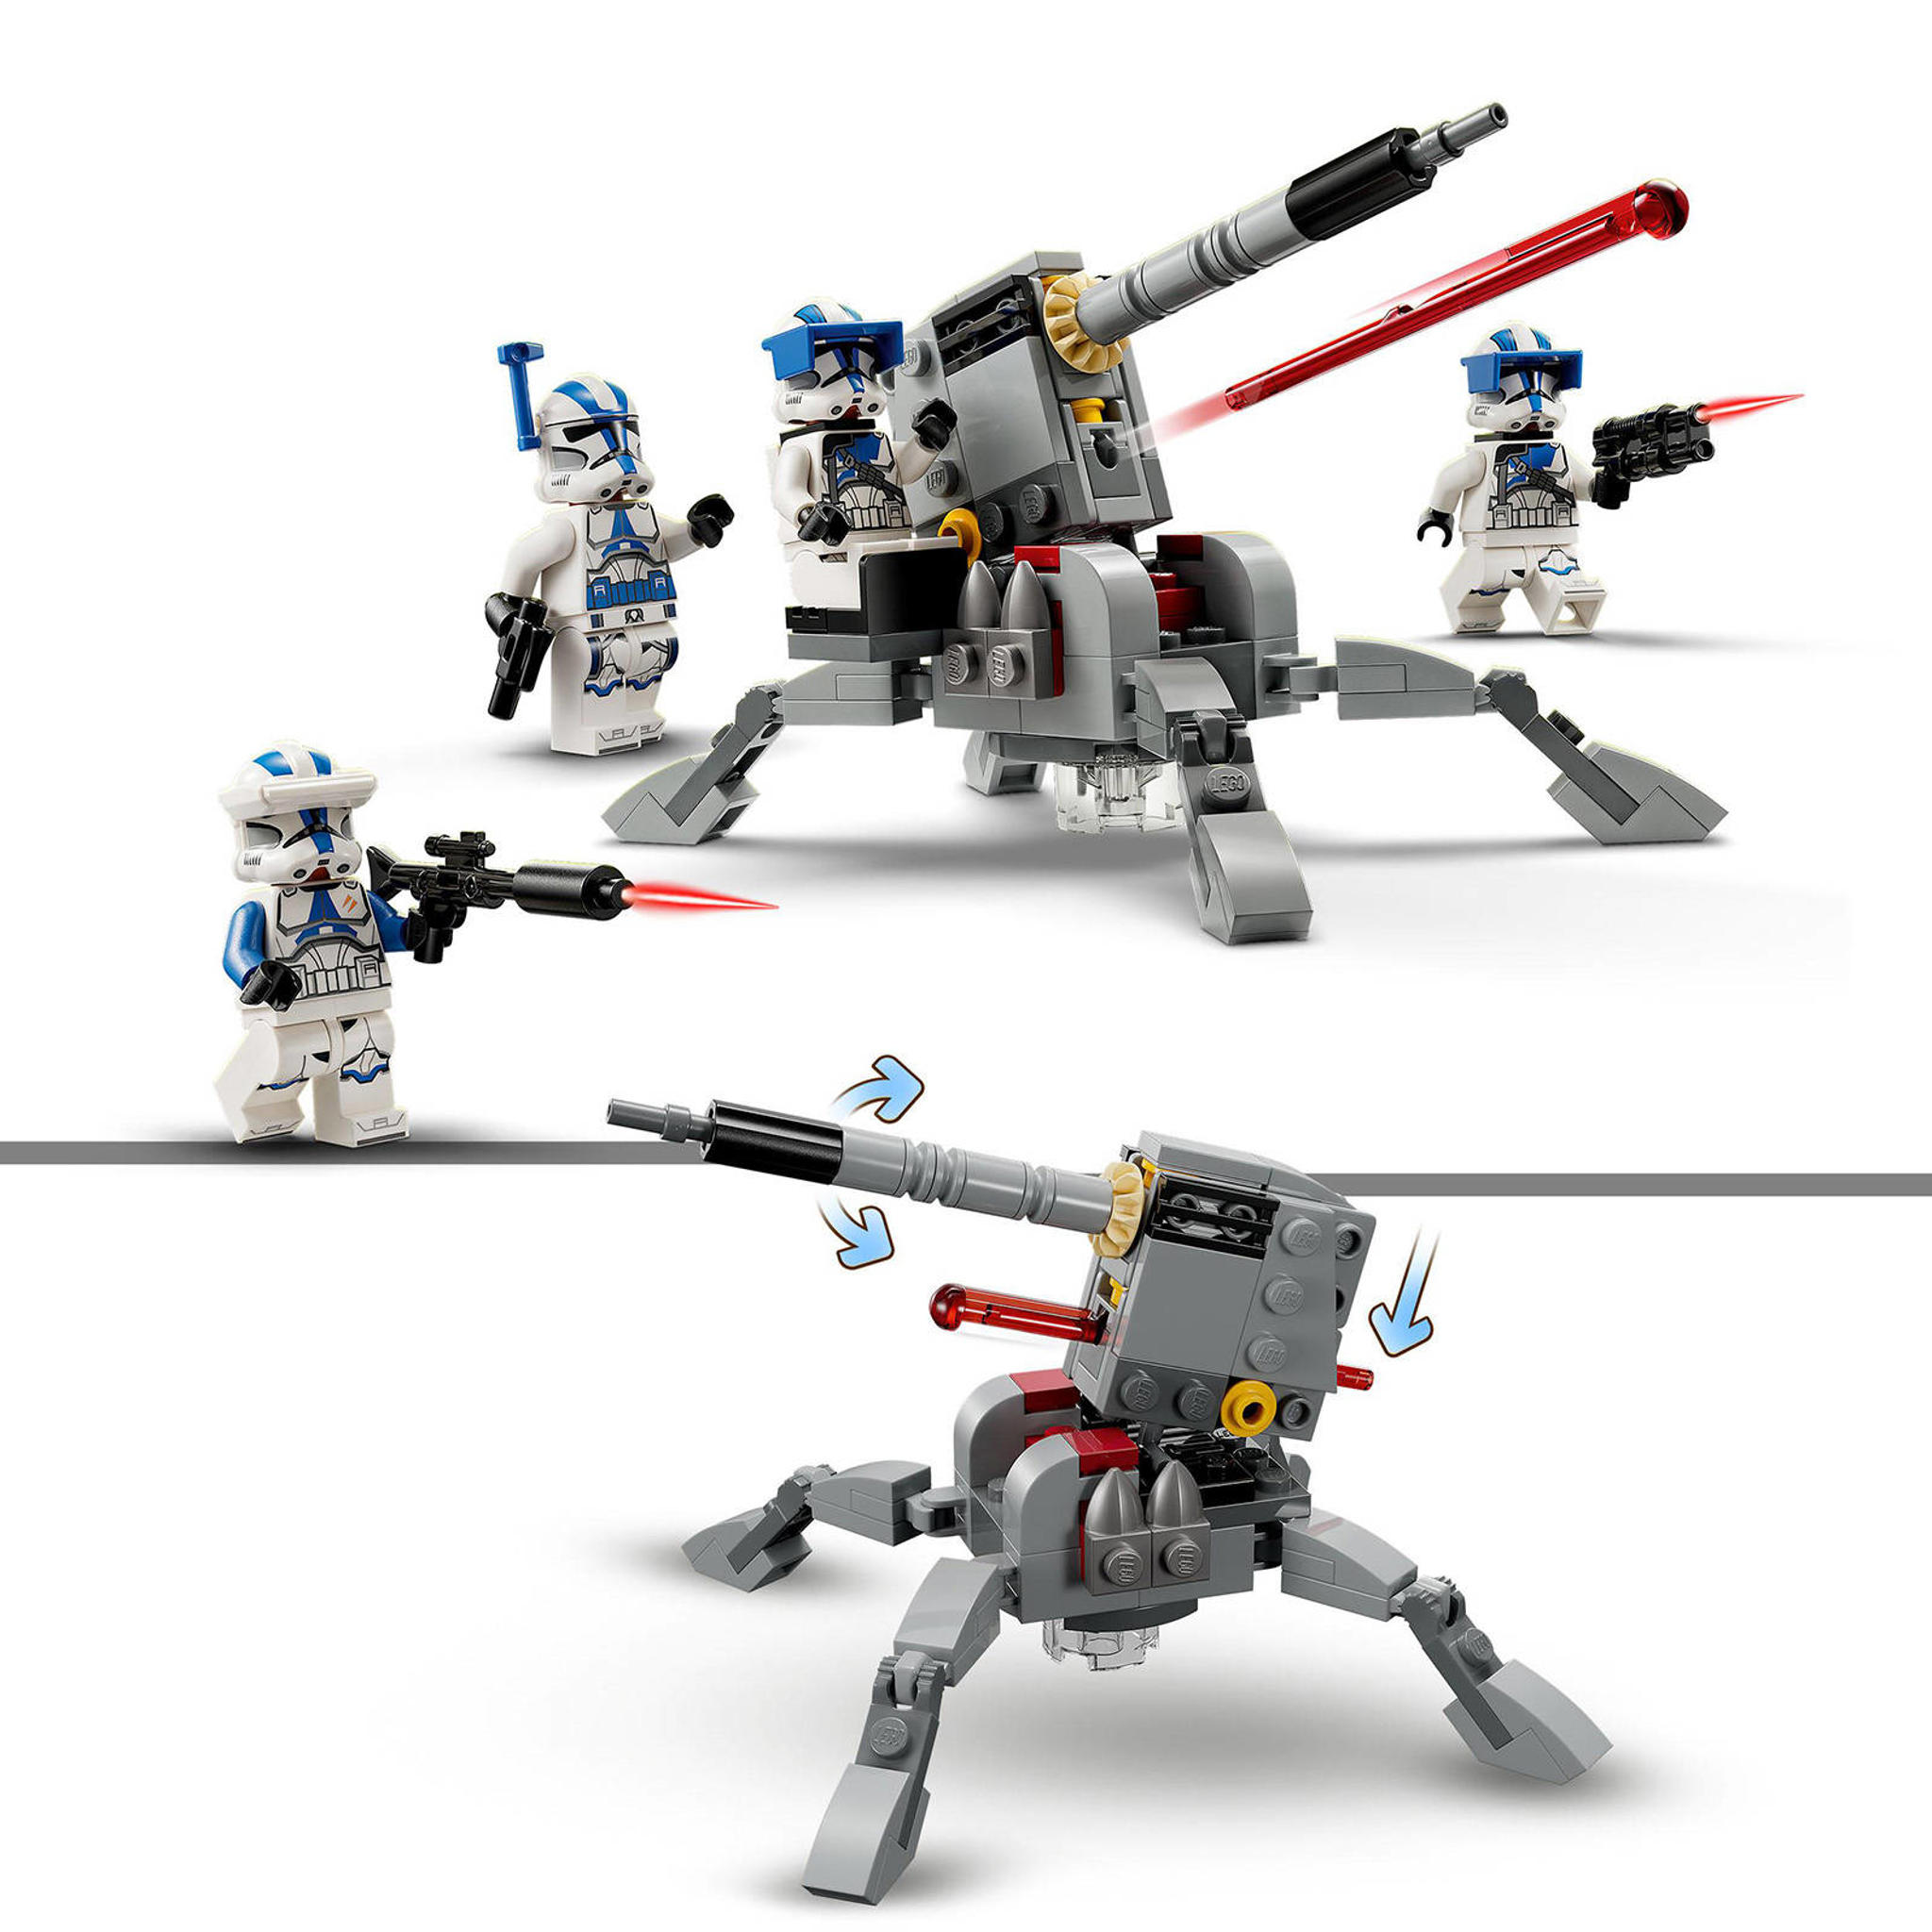 LEGO Star Wars  501st Clone Troopers Battle Pack 75345